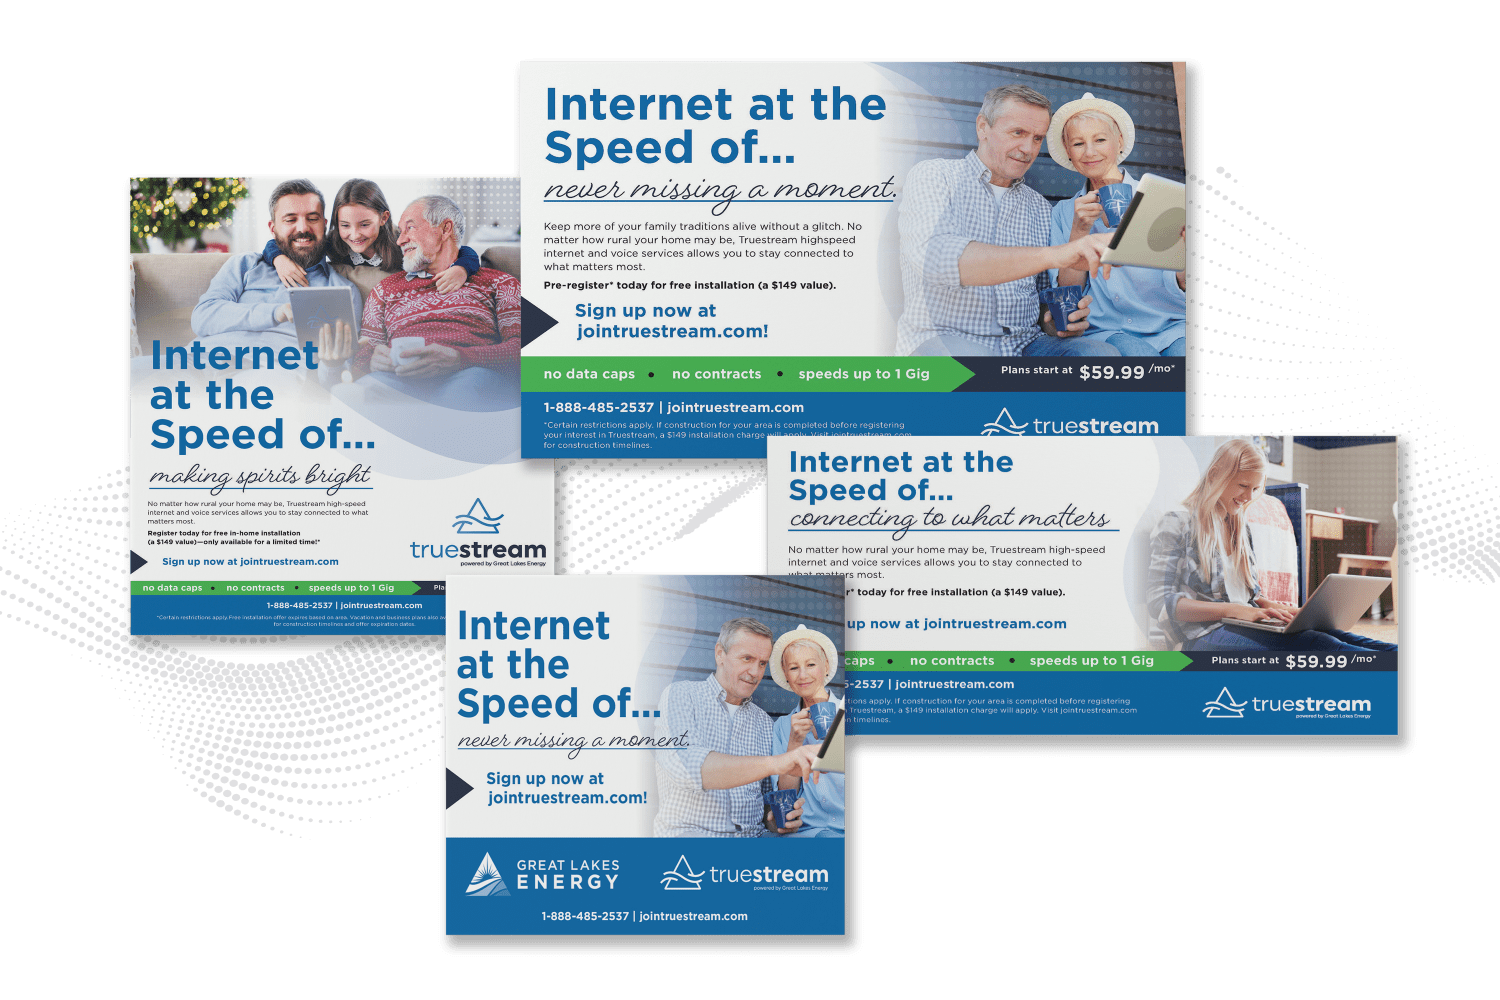 different ads designed for Truestream internet during this campaign